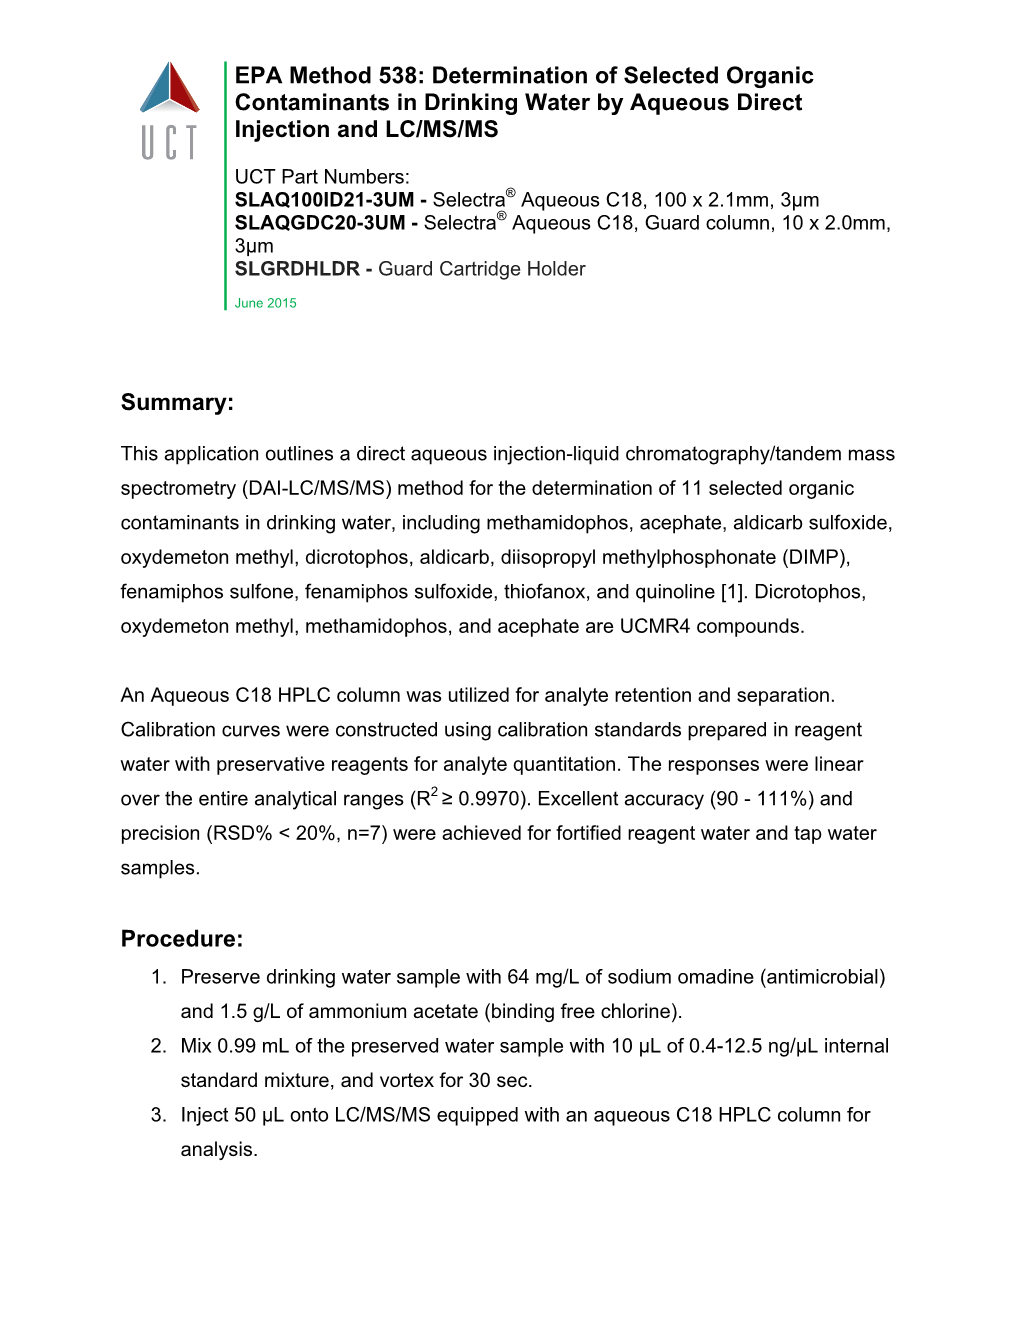 EPA Method 538: Determination of Selected Organic Contaminants in Drinking Water by Aqueous Direct Injection and LC/MS/MS Summar